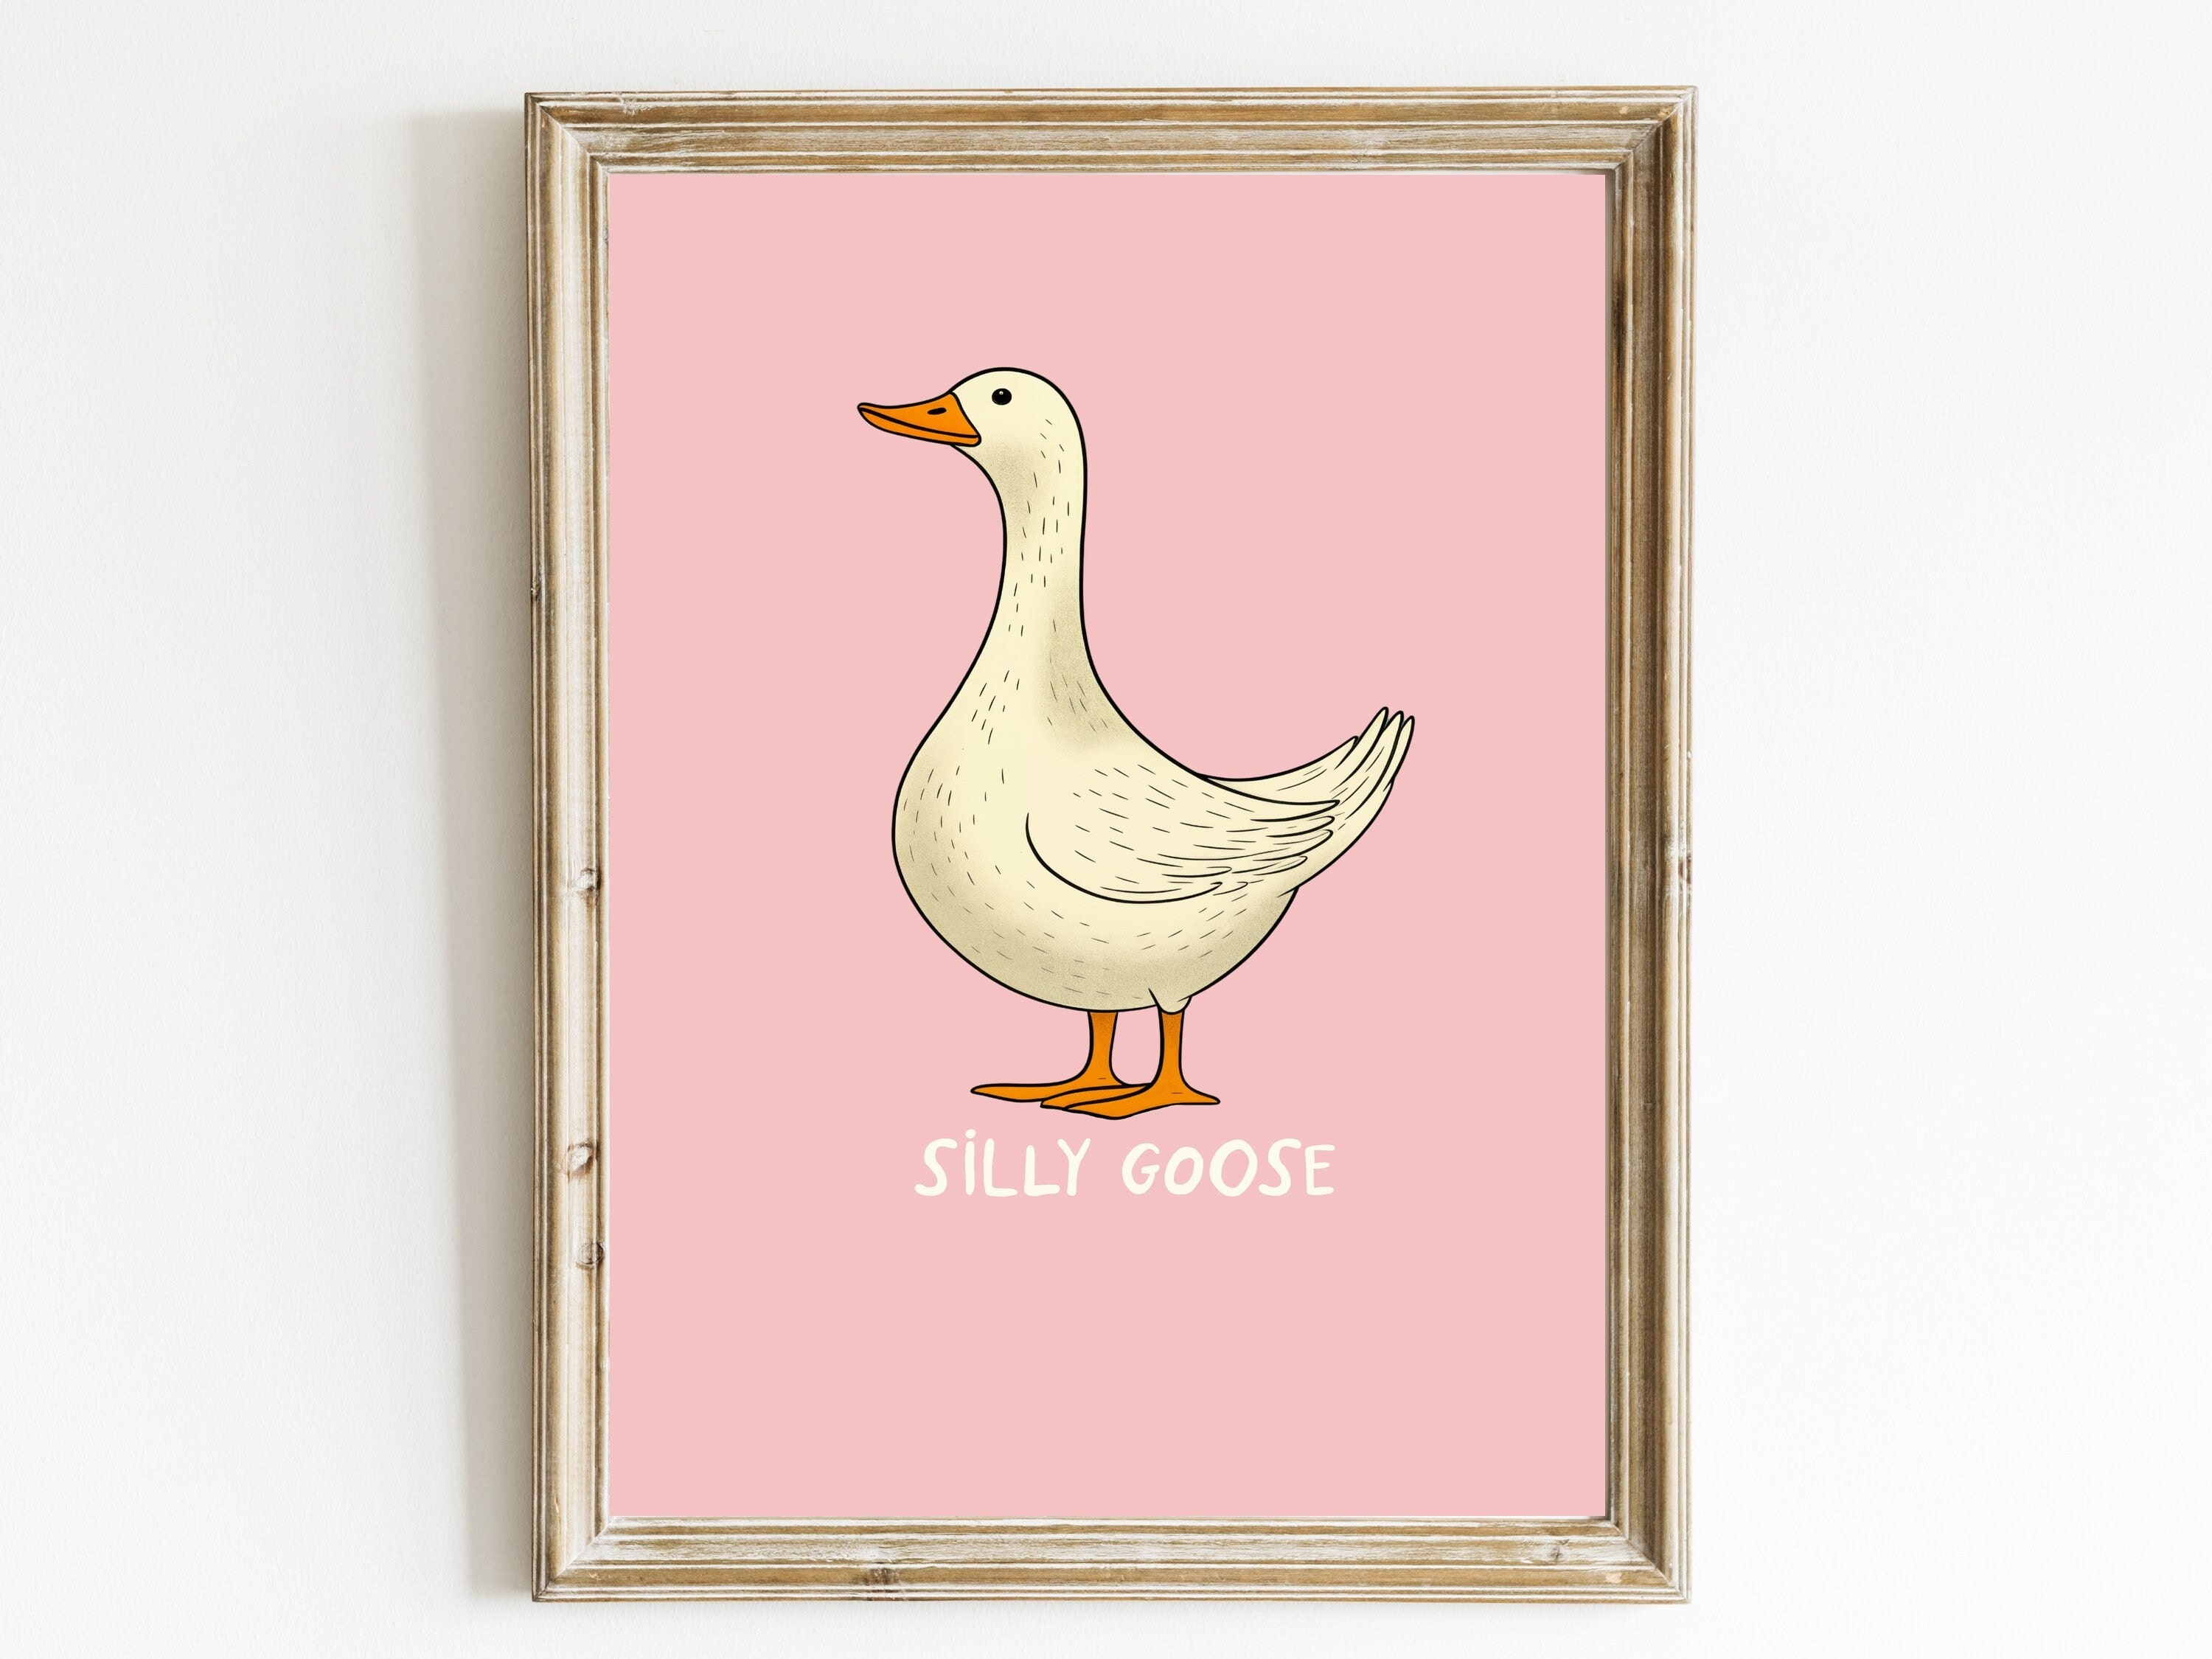  Silly Goose Gifts Funny Christmas Bathroom Themed Art Print  Wall Sign Poster Set (Funny Bathroom Set of 4): Posters & Prints